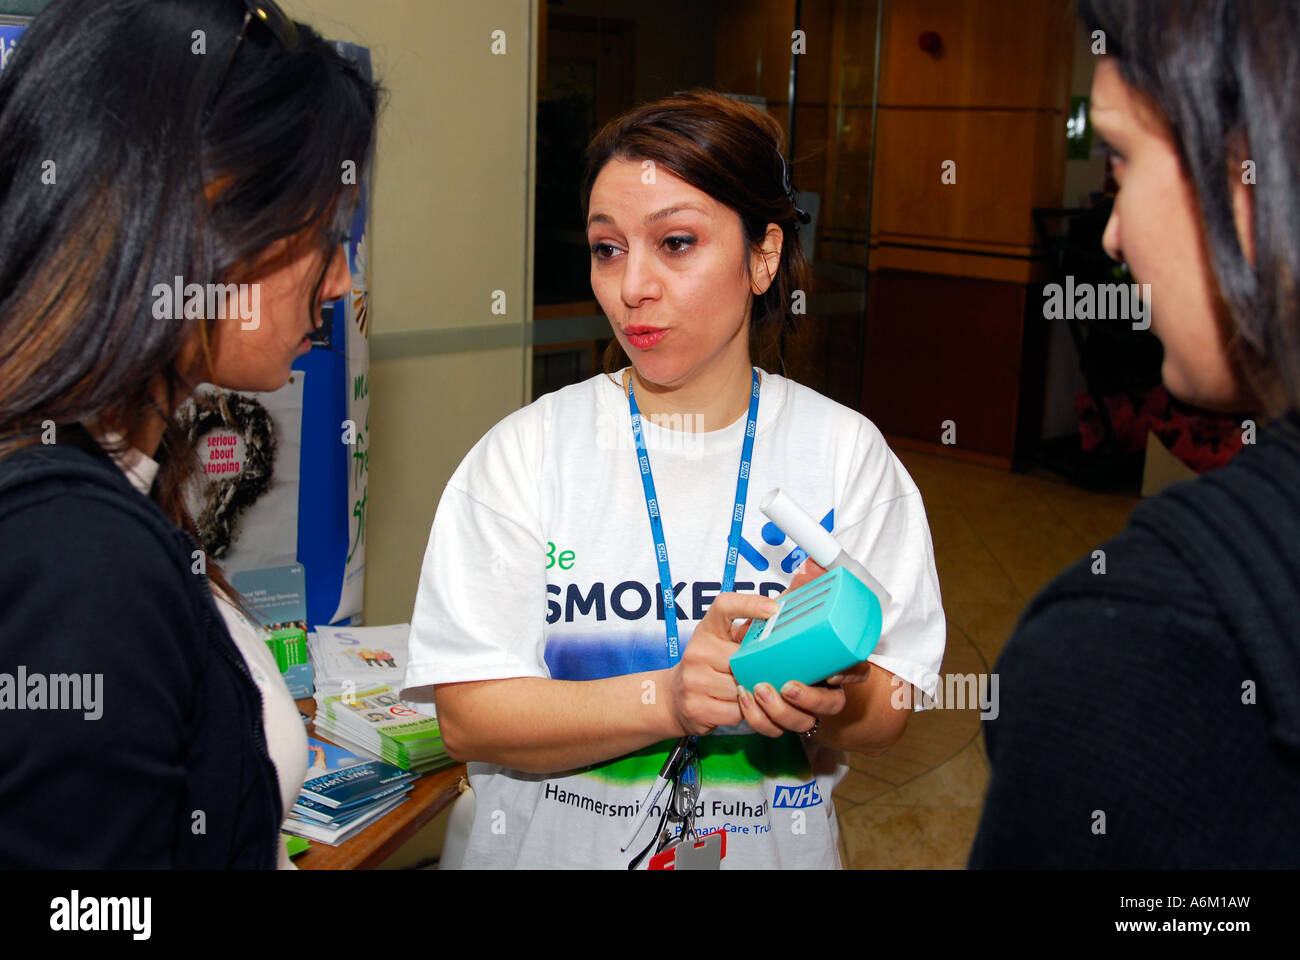 Midwife talking to young women about the hazards of smoking whilst pregnant, Hammersmith Hospital, west London, UK. Stock Photo